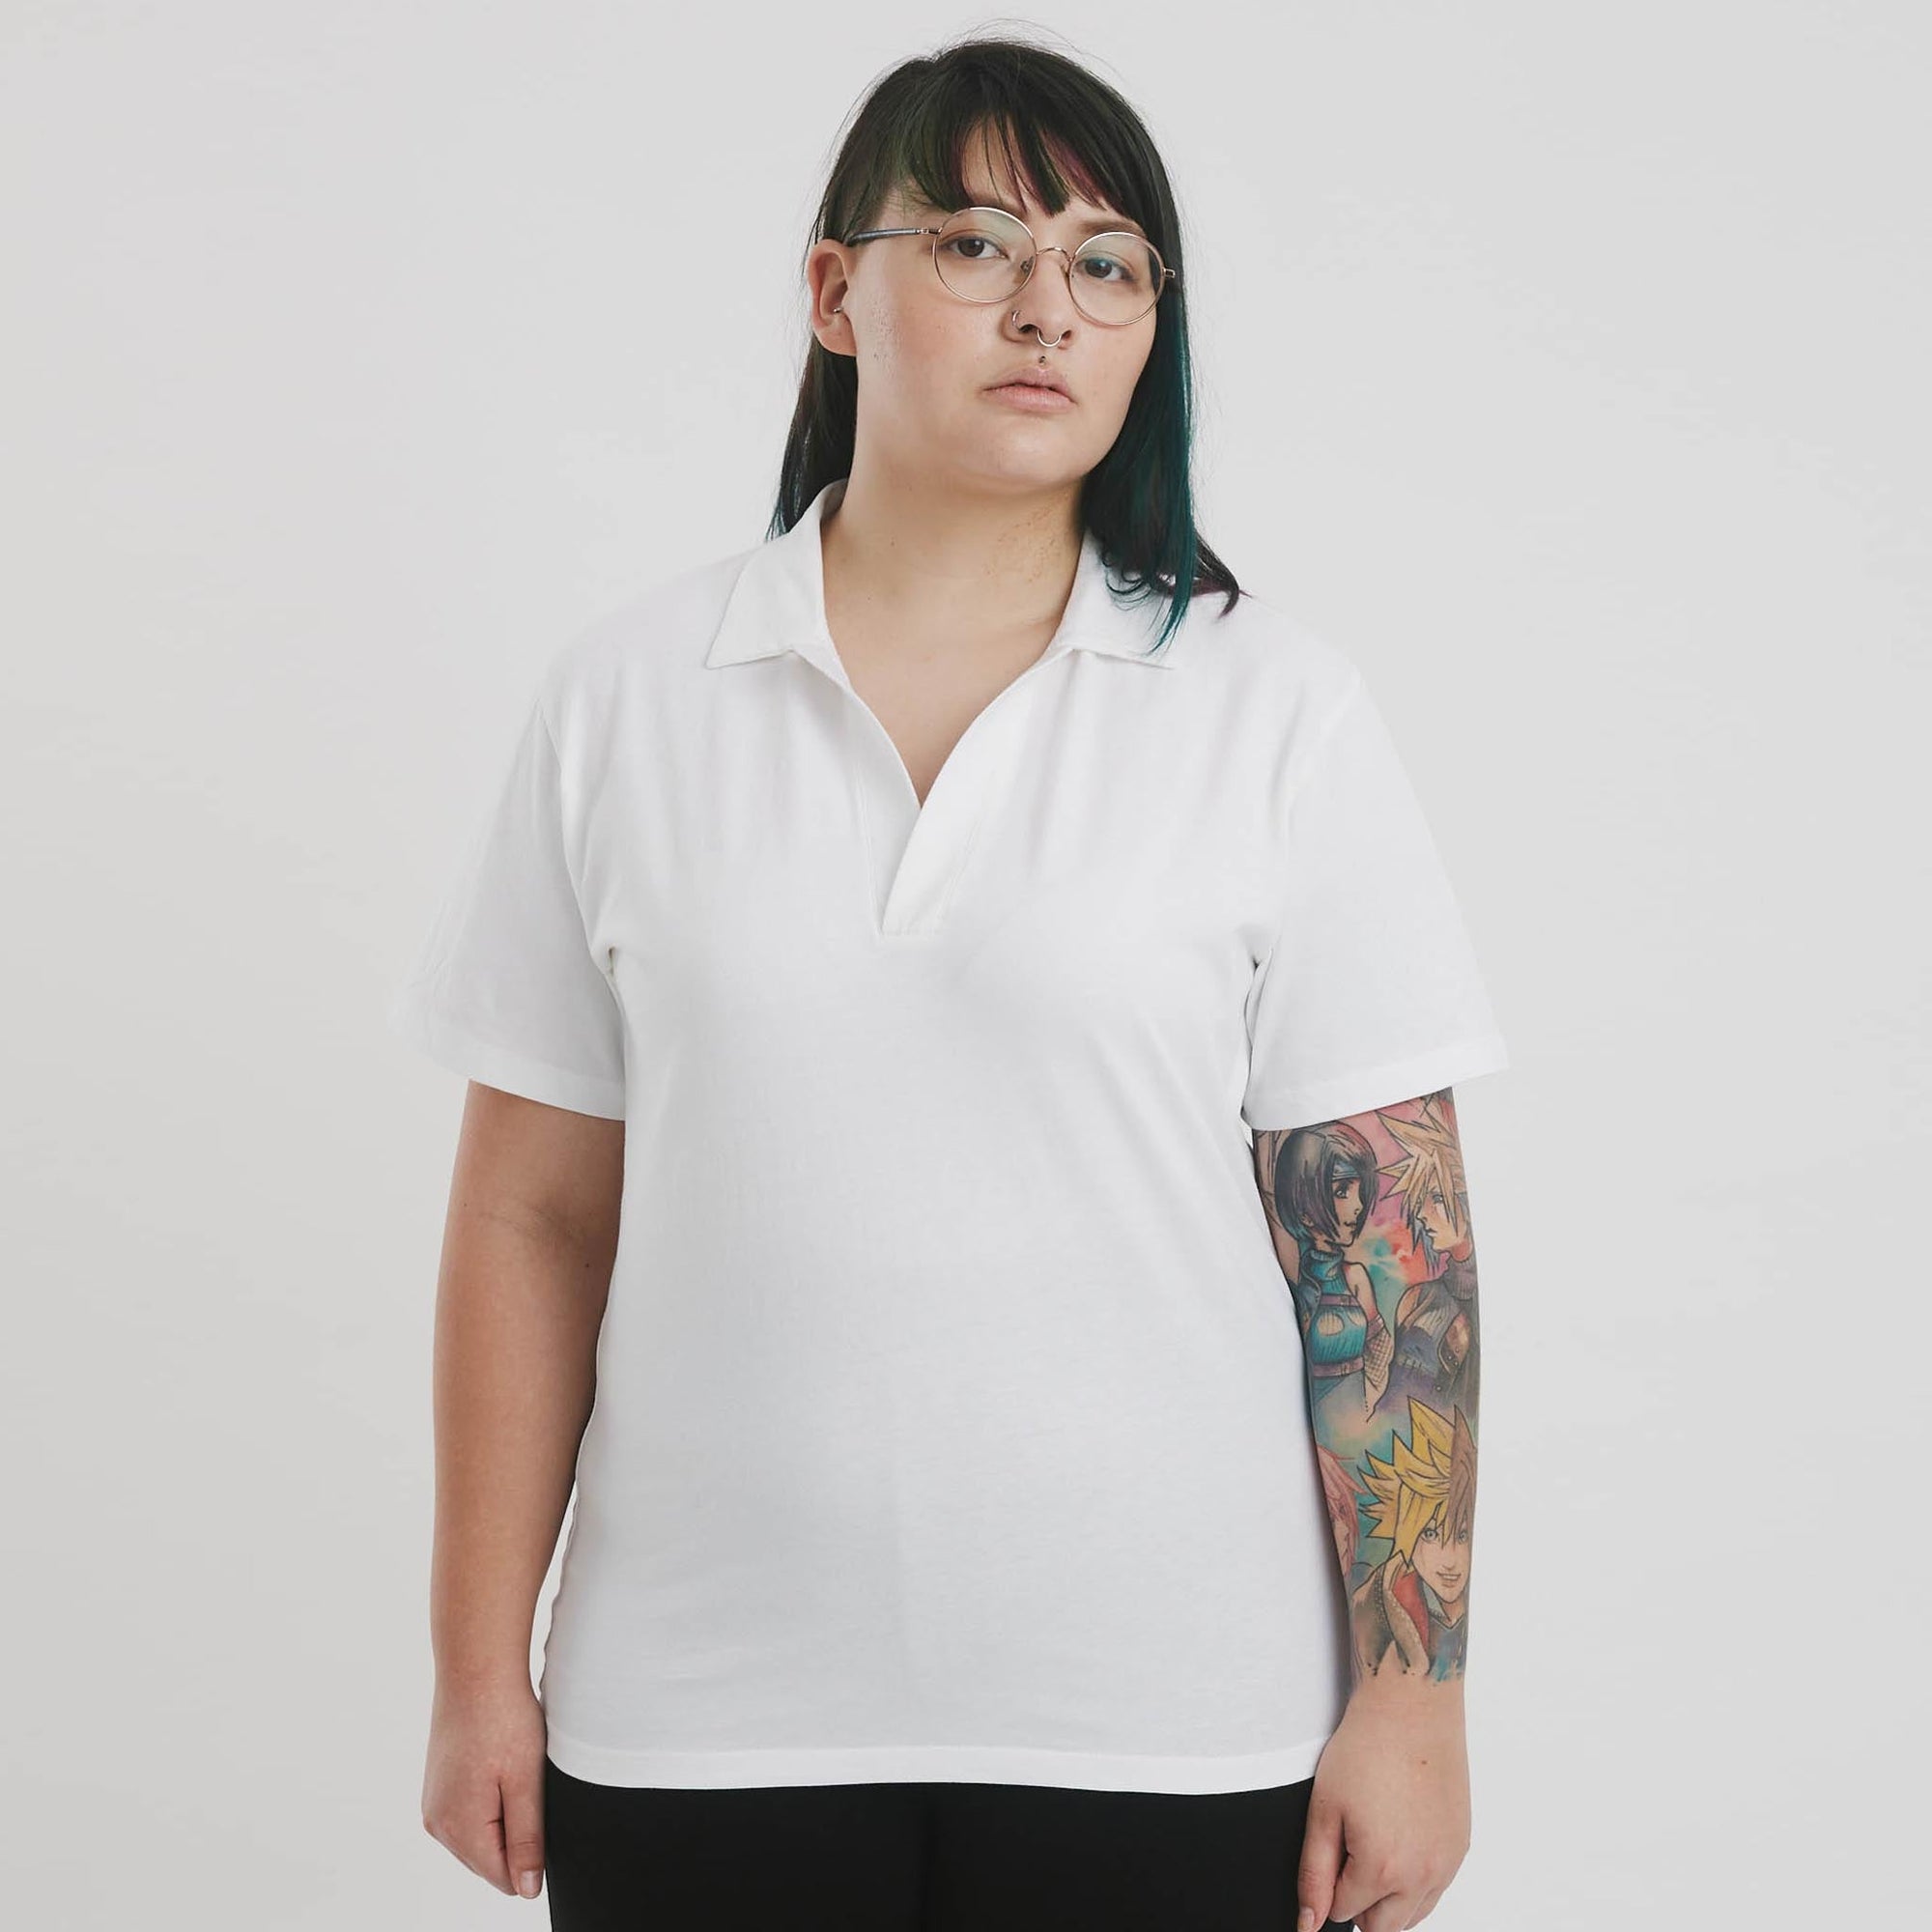 The Comfy Polo Shirt-Womens. No tags, no lables. The Shapes United.